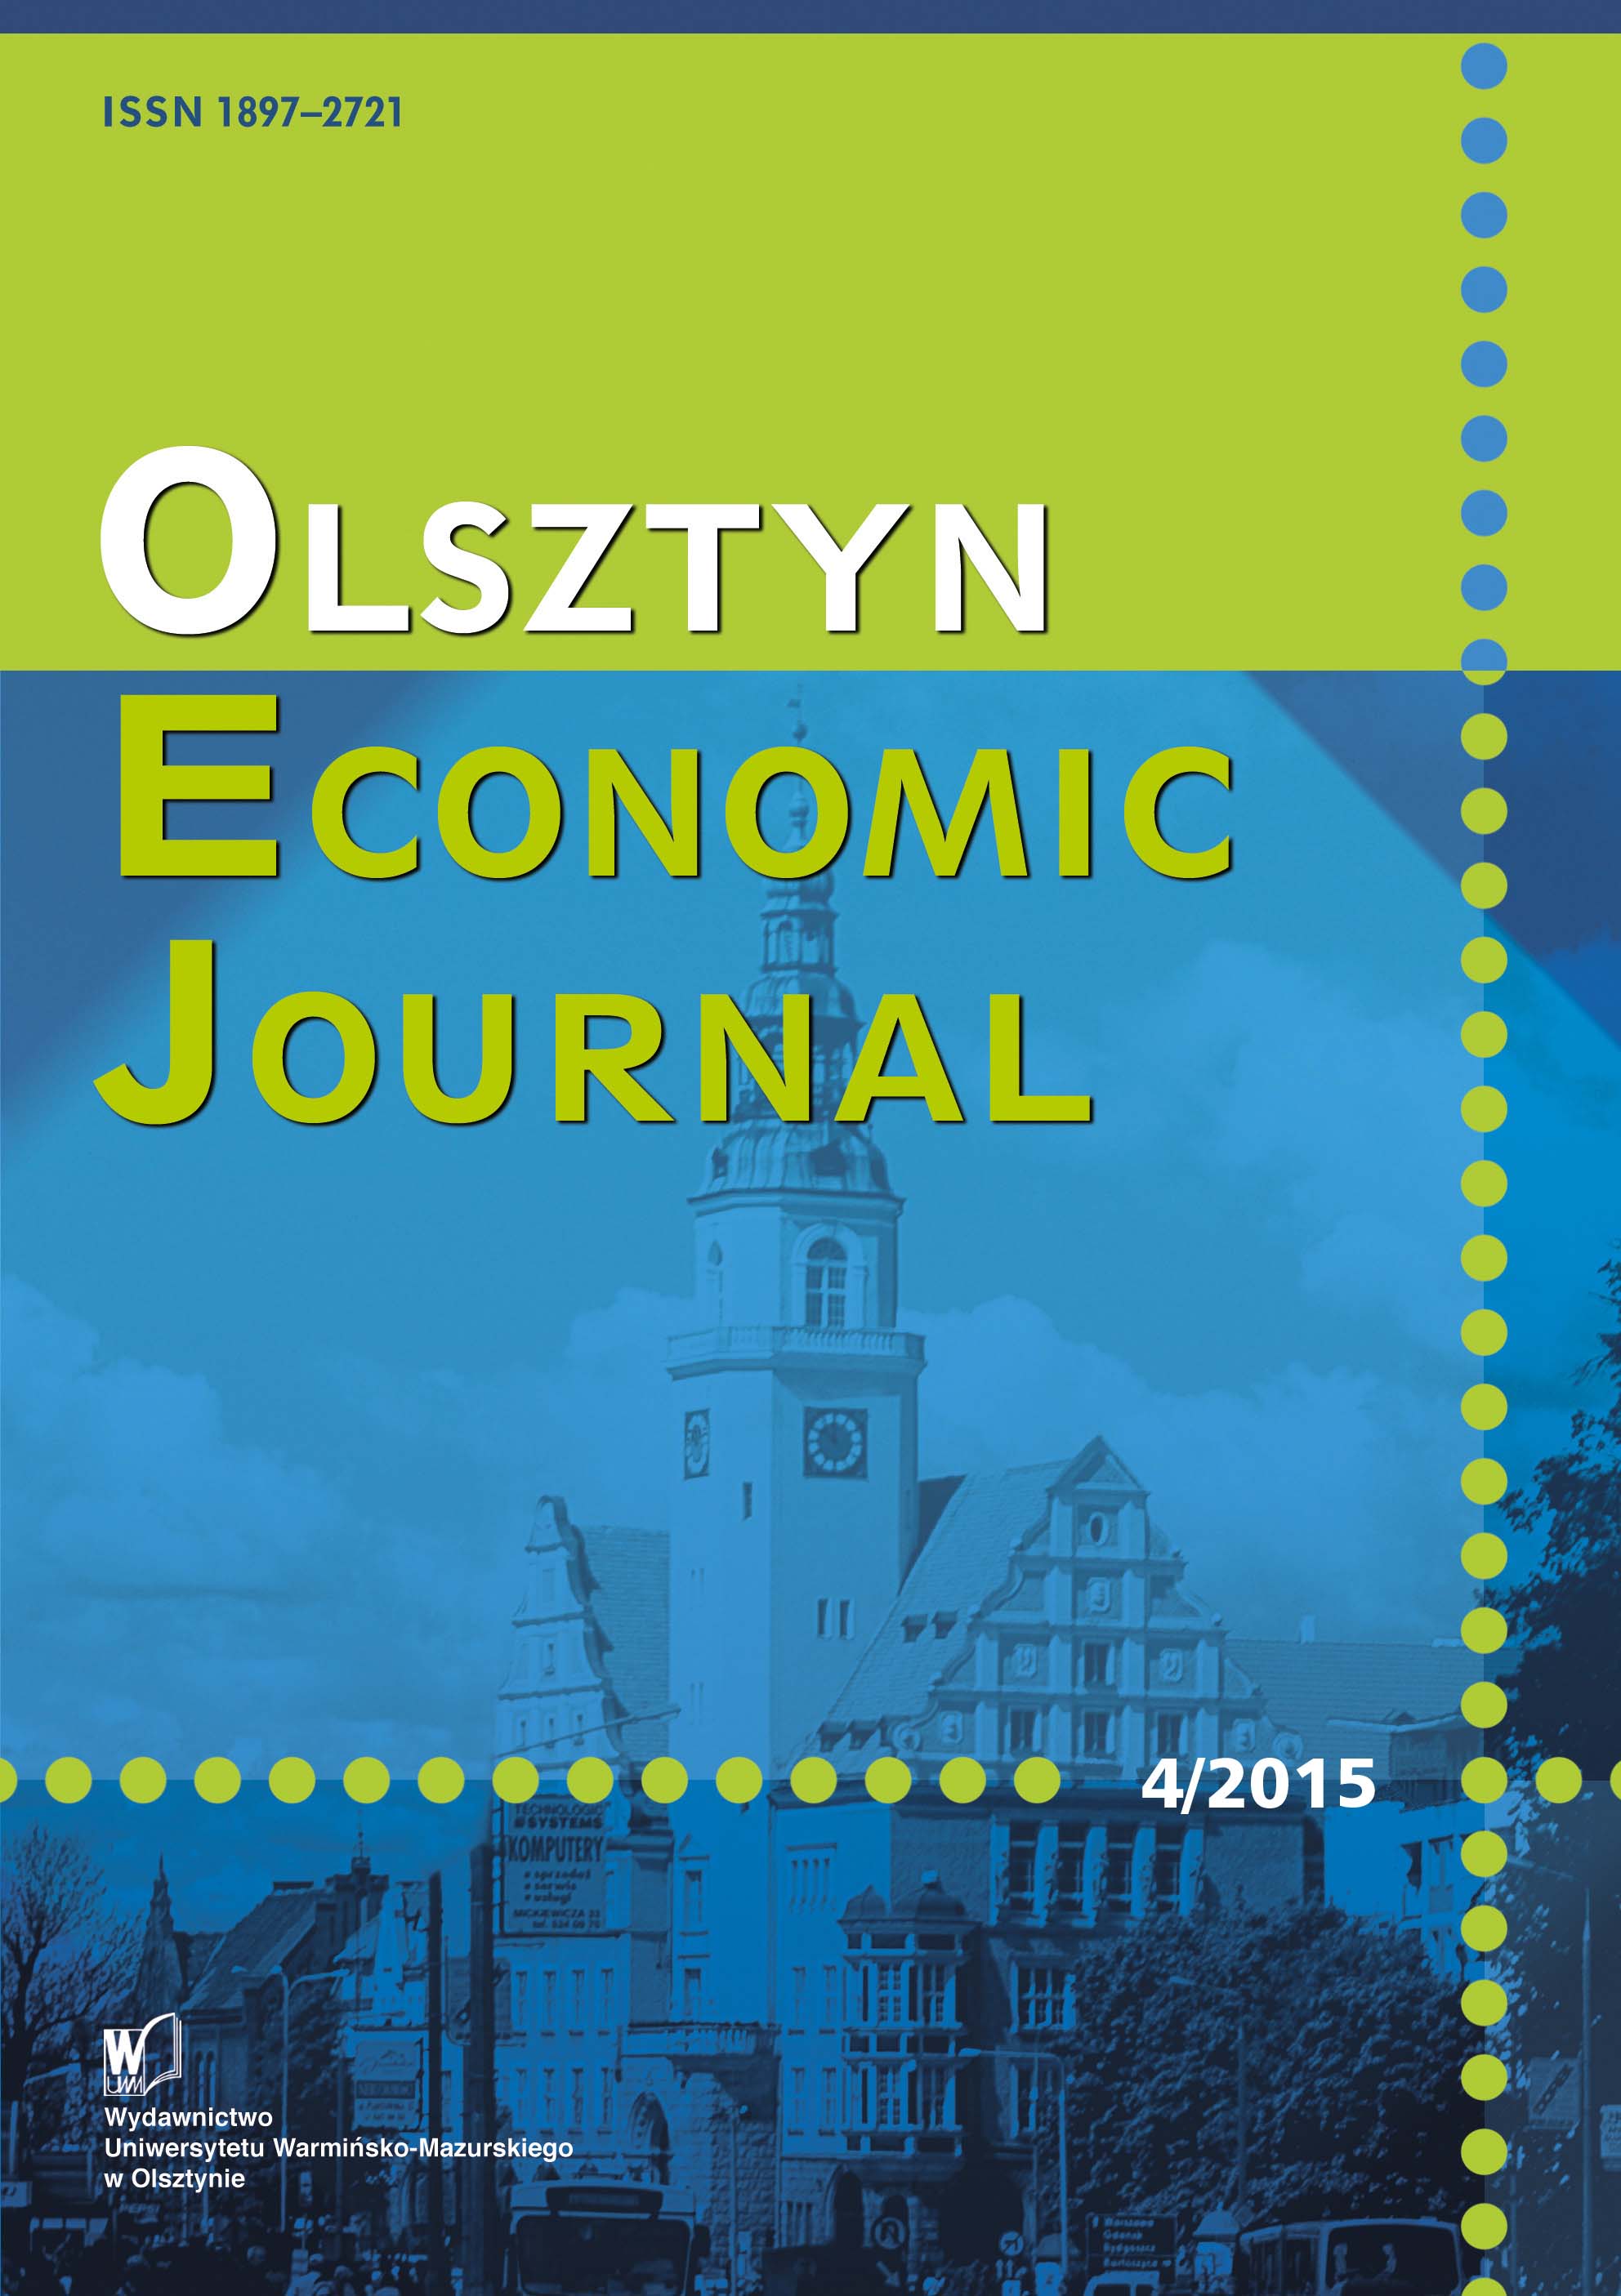 Return on Sales for Companies in Eastern Poland Cover Image